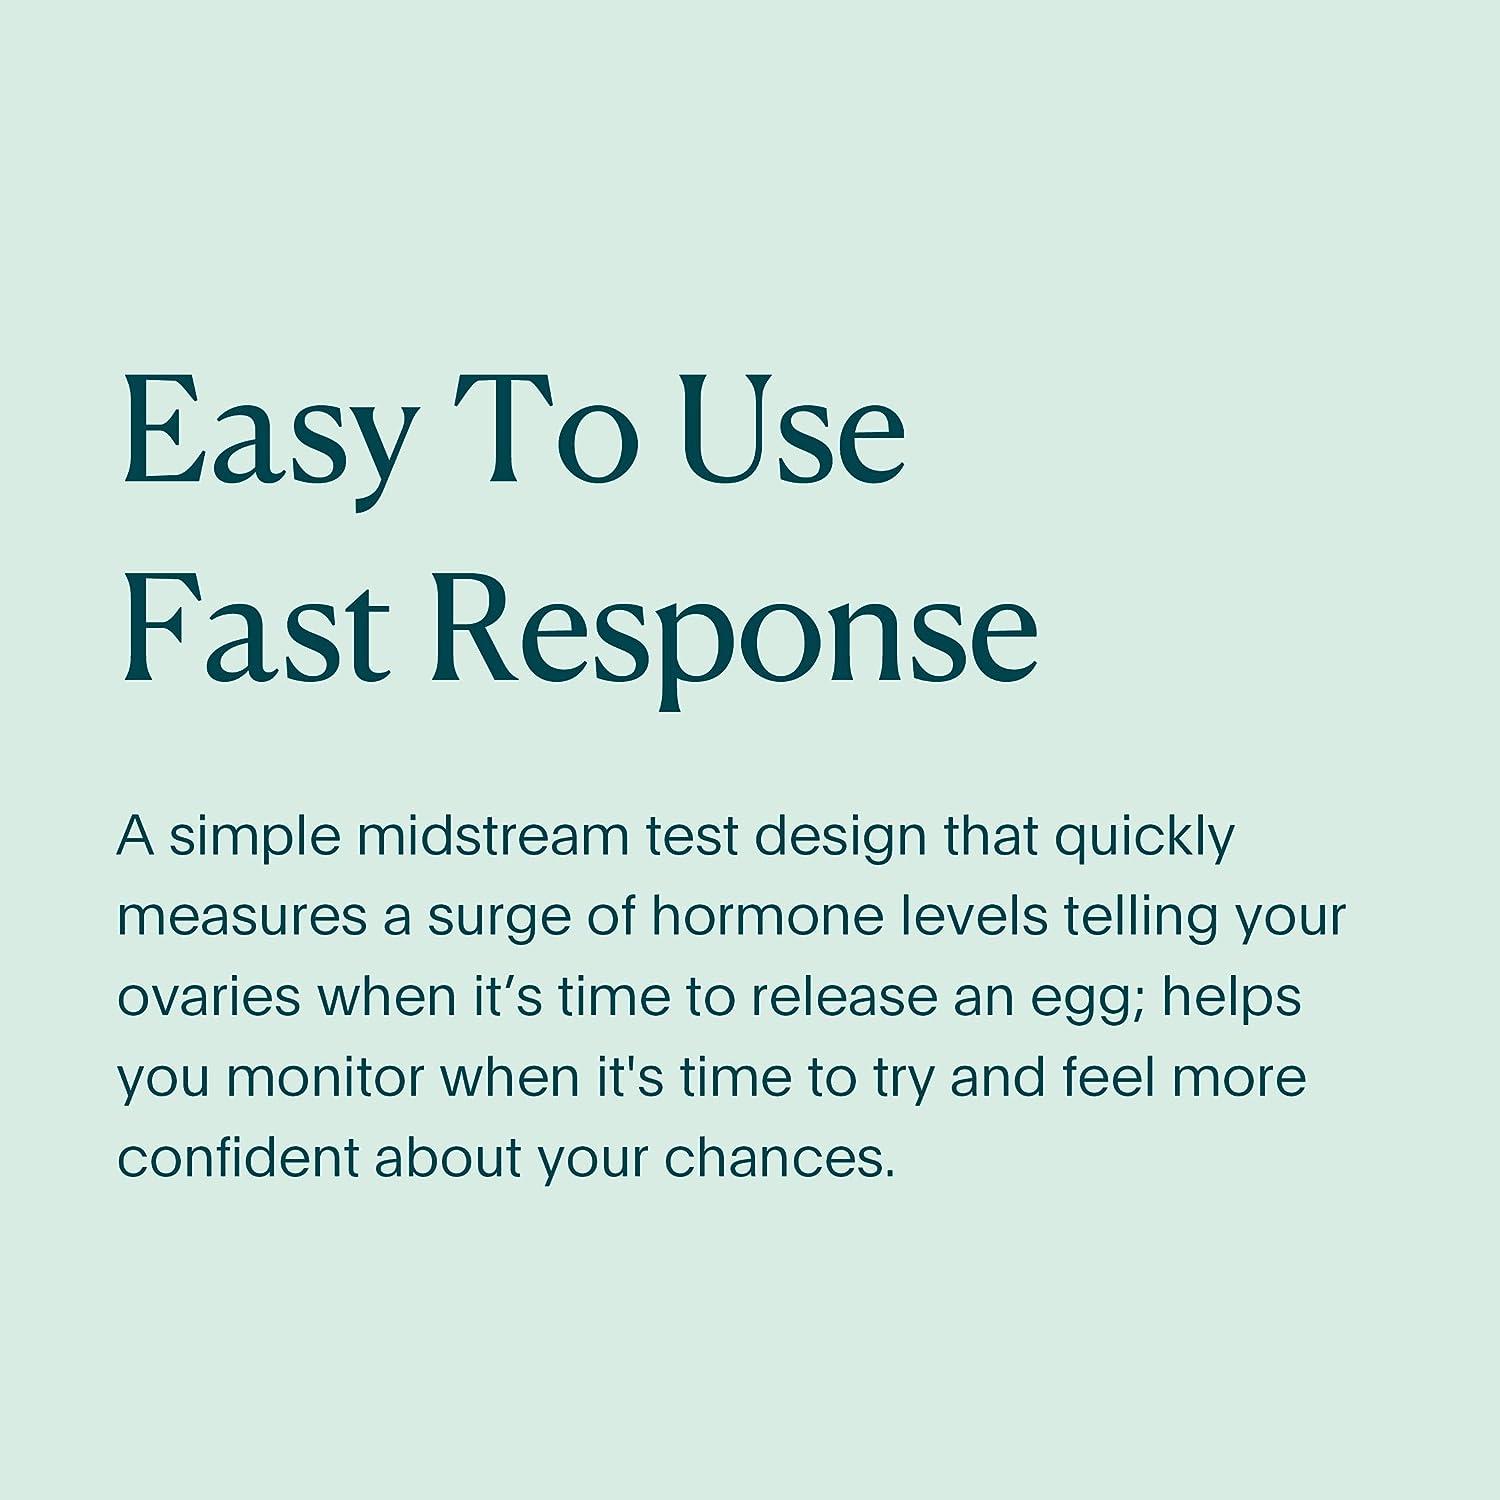  Natalist Ovulation Tests Home Fertility Predictor Kit for Women  - Clear & Accurate Rapid Result Tracker Helps Get Timing Right While  Planning for Baby - 10 Count (5) : Health & Household